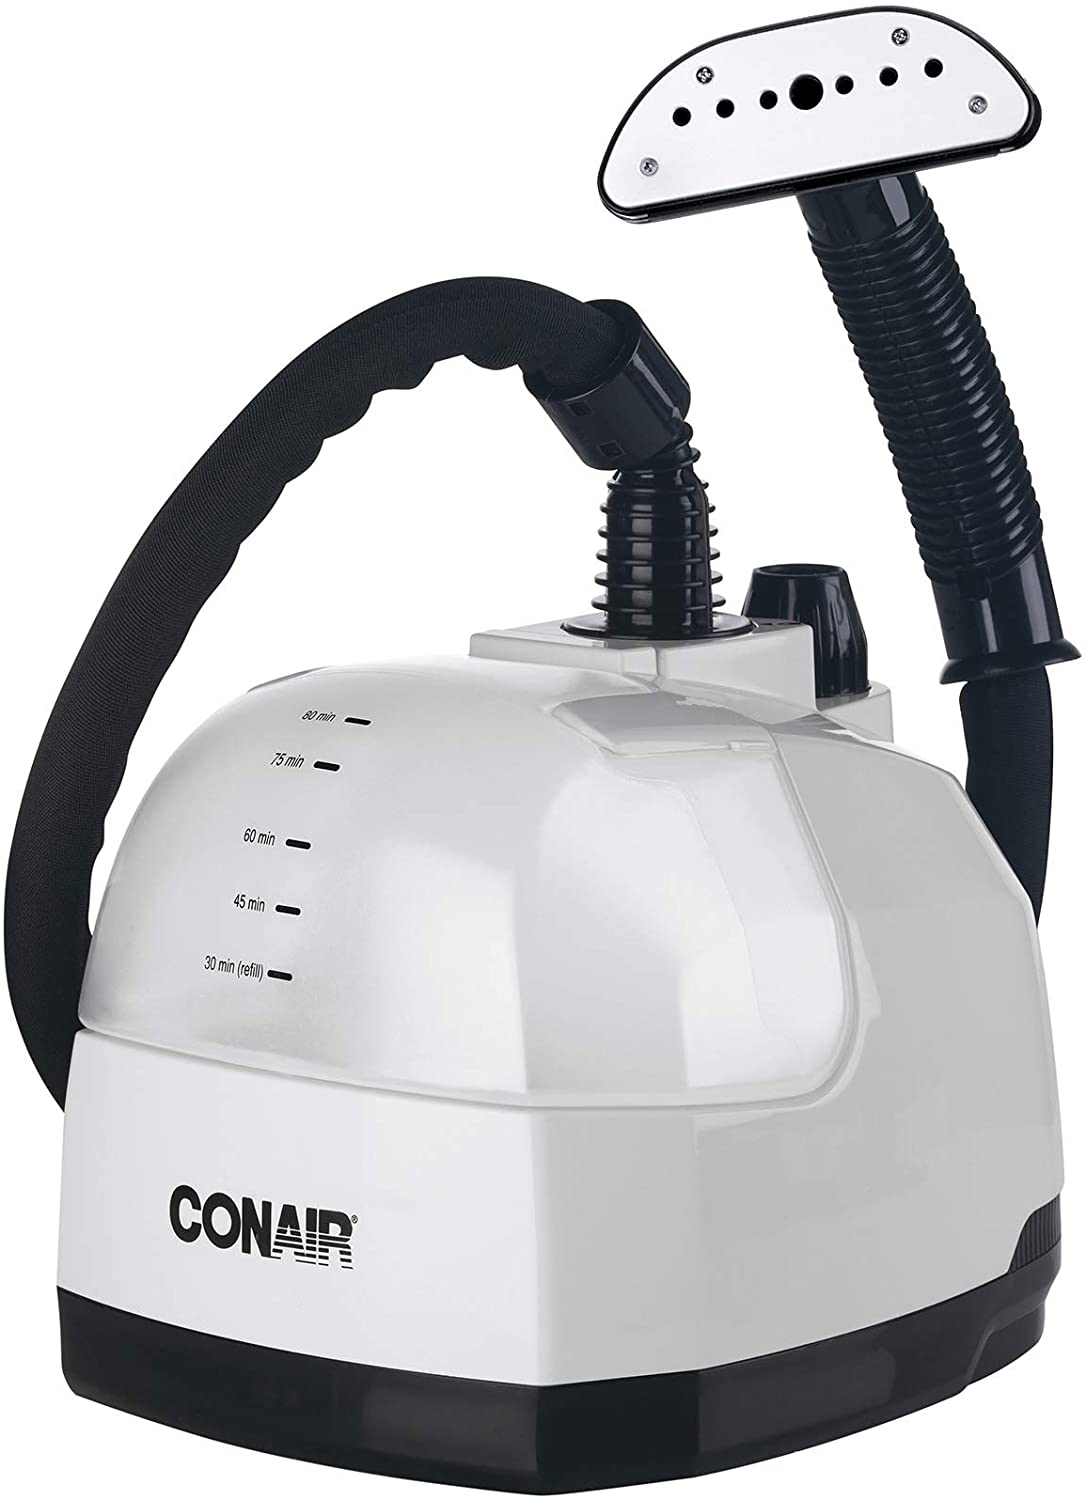 Conair CompleteSteam Large Capacity Upright Clothes Steamer